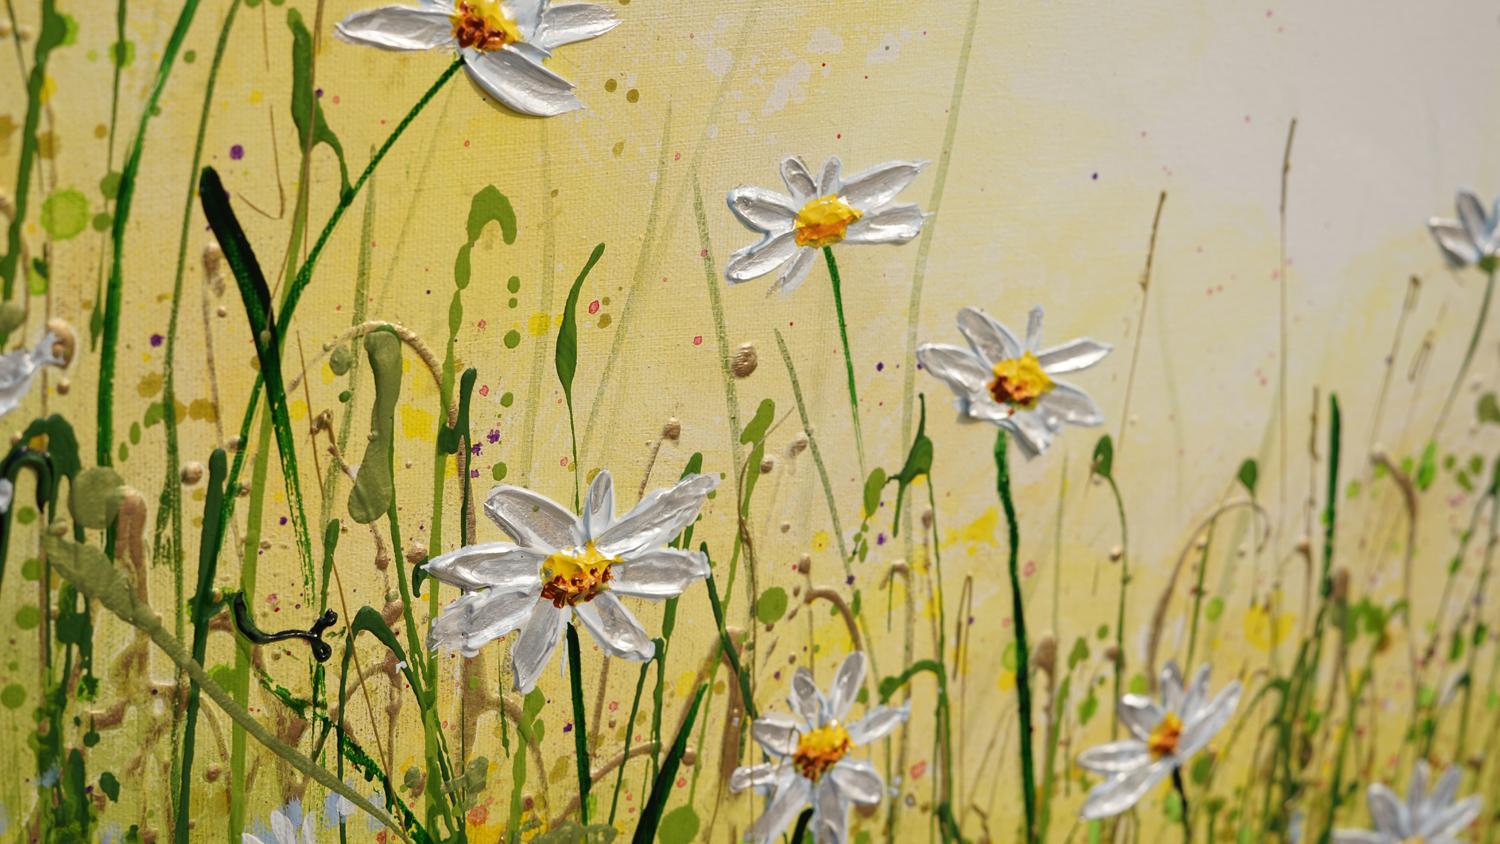 painting of a daisy